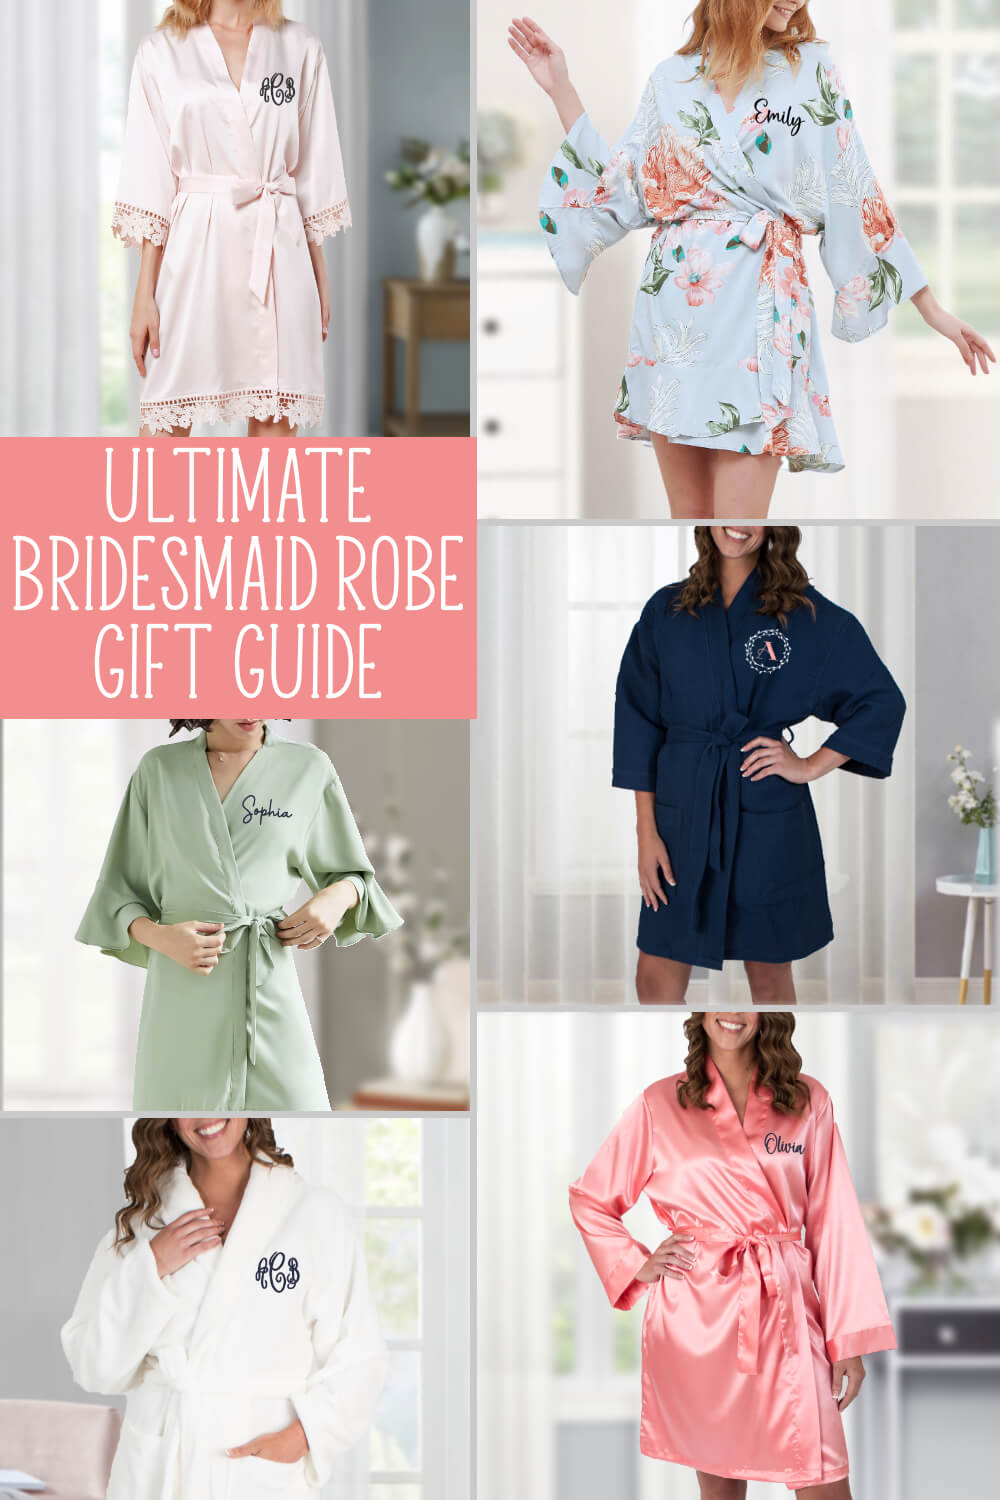 Ultimate Bridesmaid Robes Gift Guide